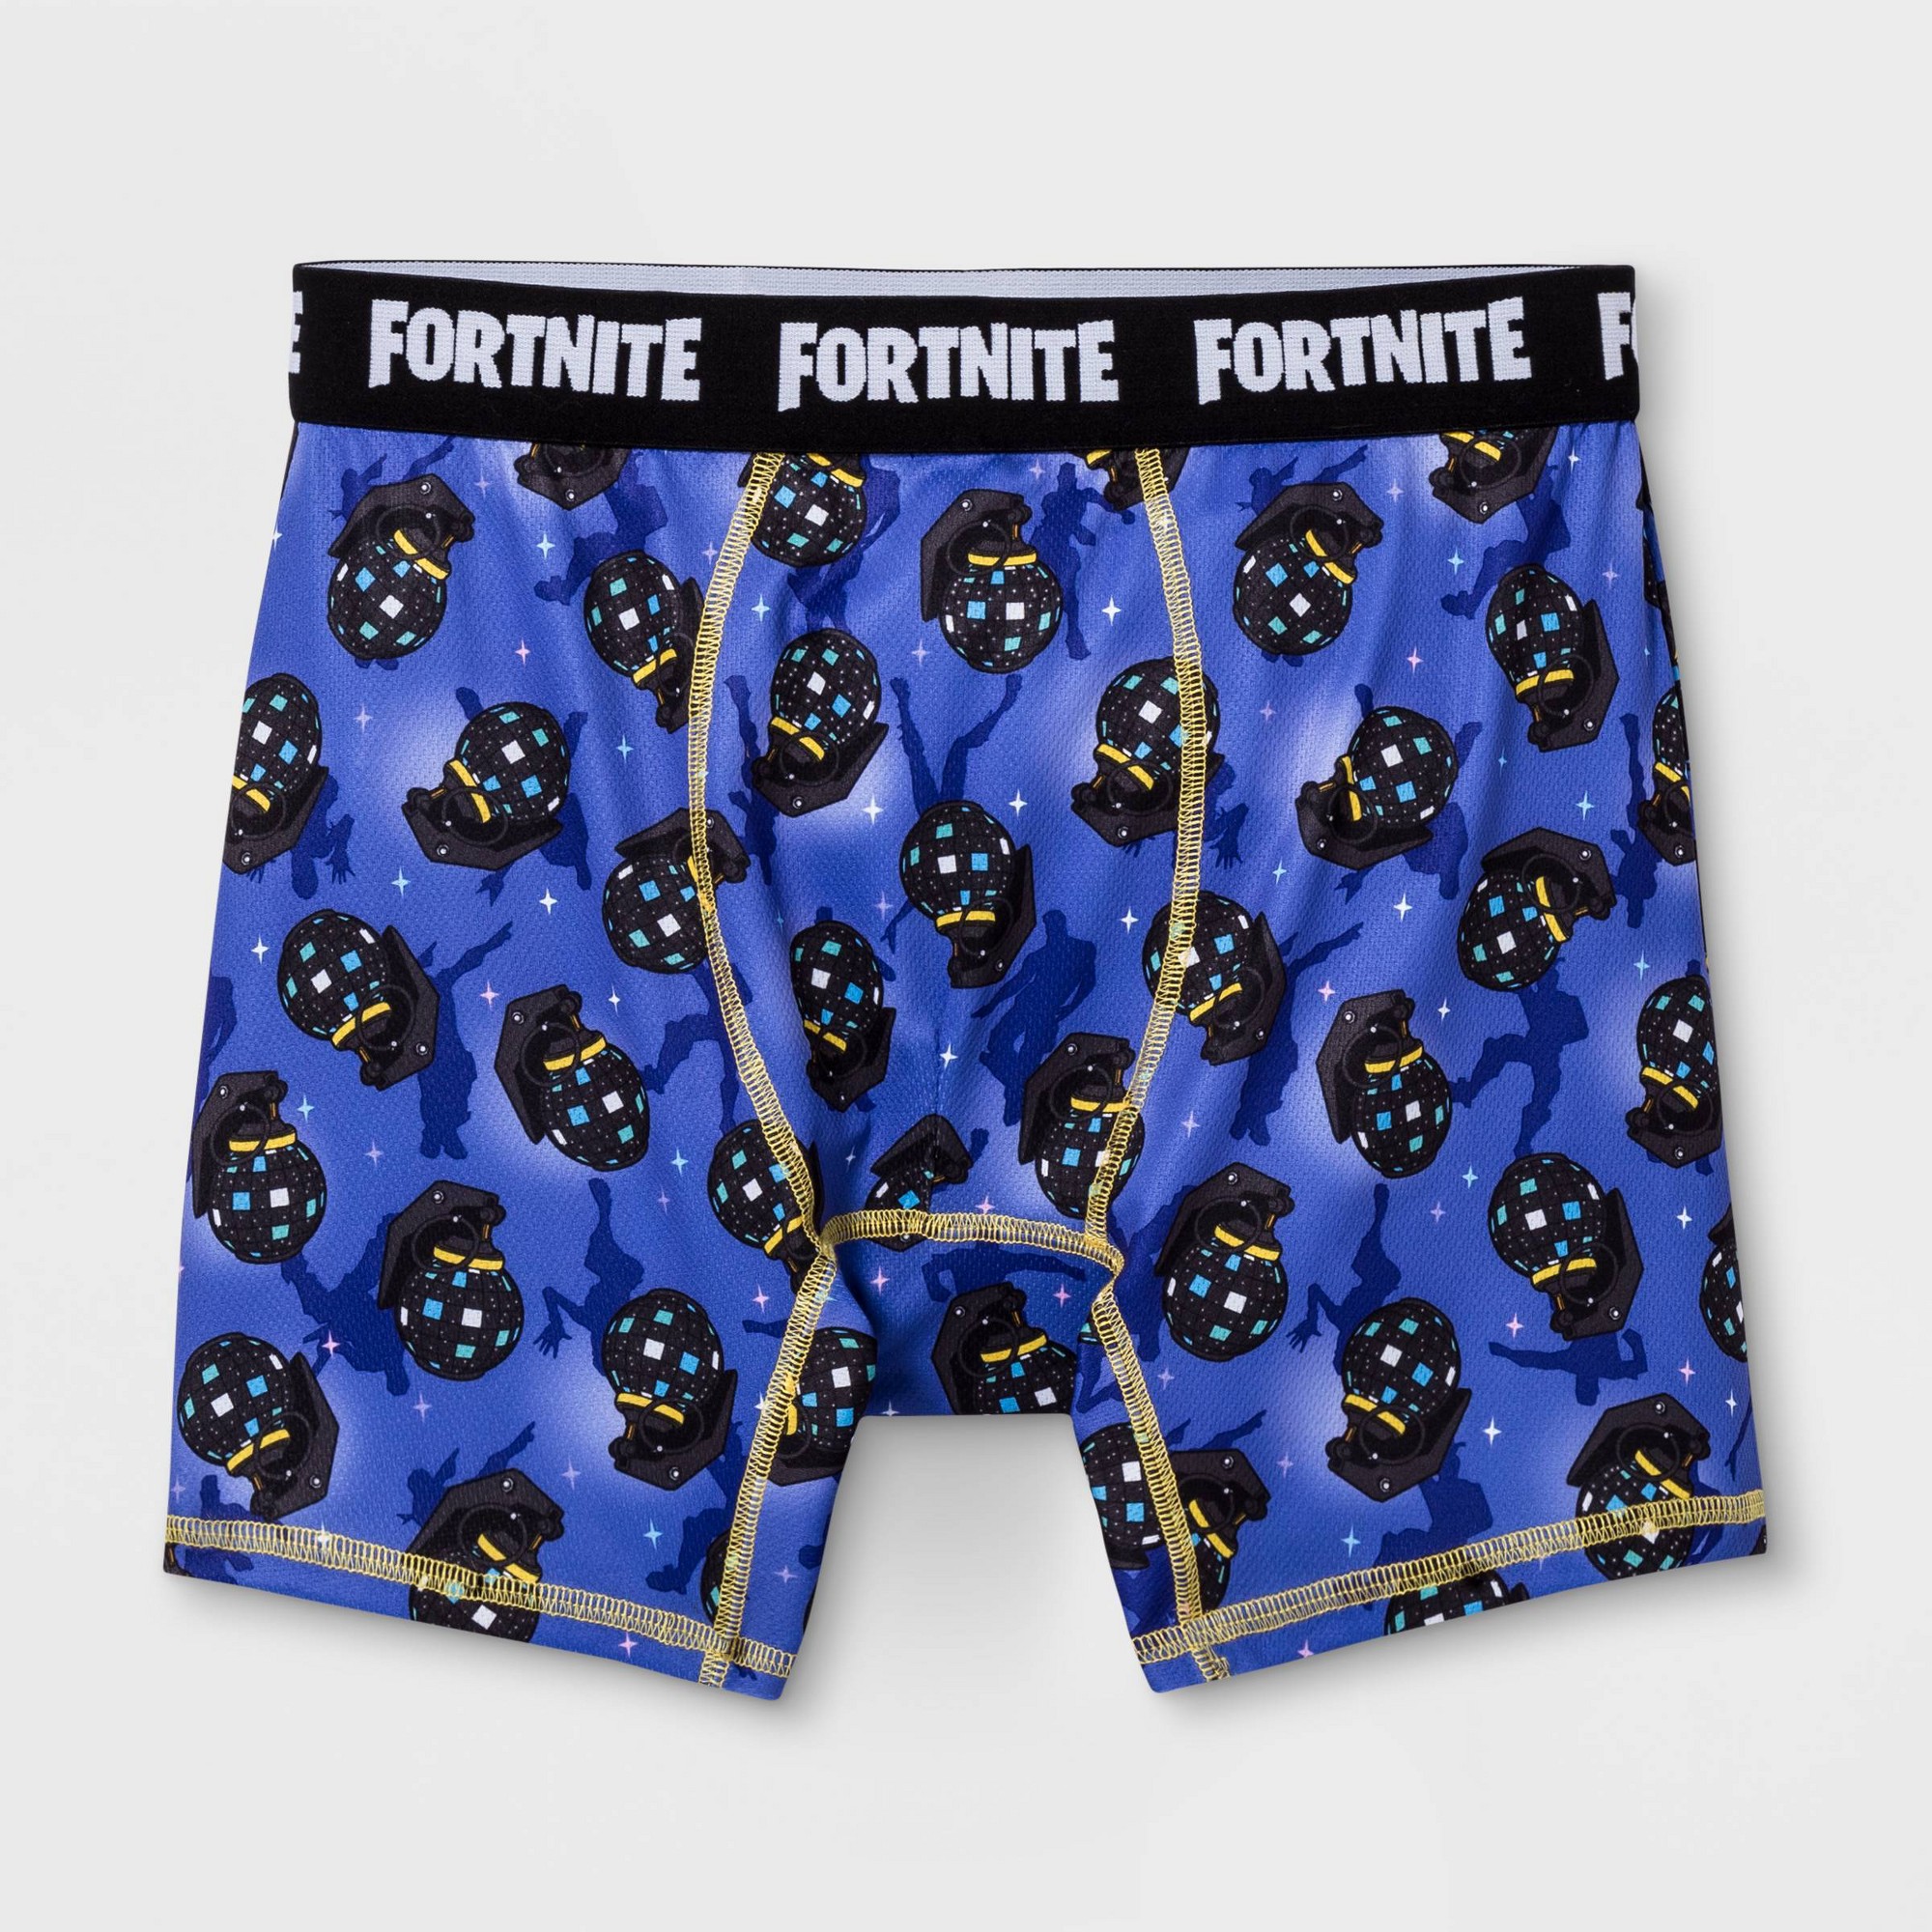 Fornite Boxers Boys Size 8 Blue Boxer Briefs Waist Band Logo Youth Briefs  NWOT